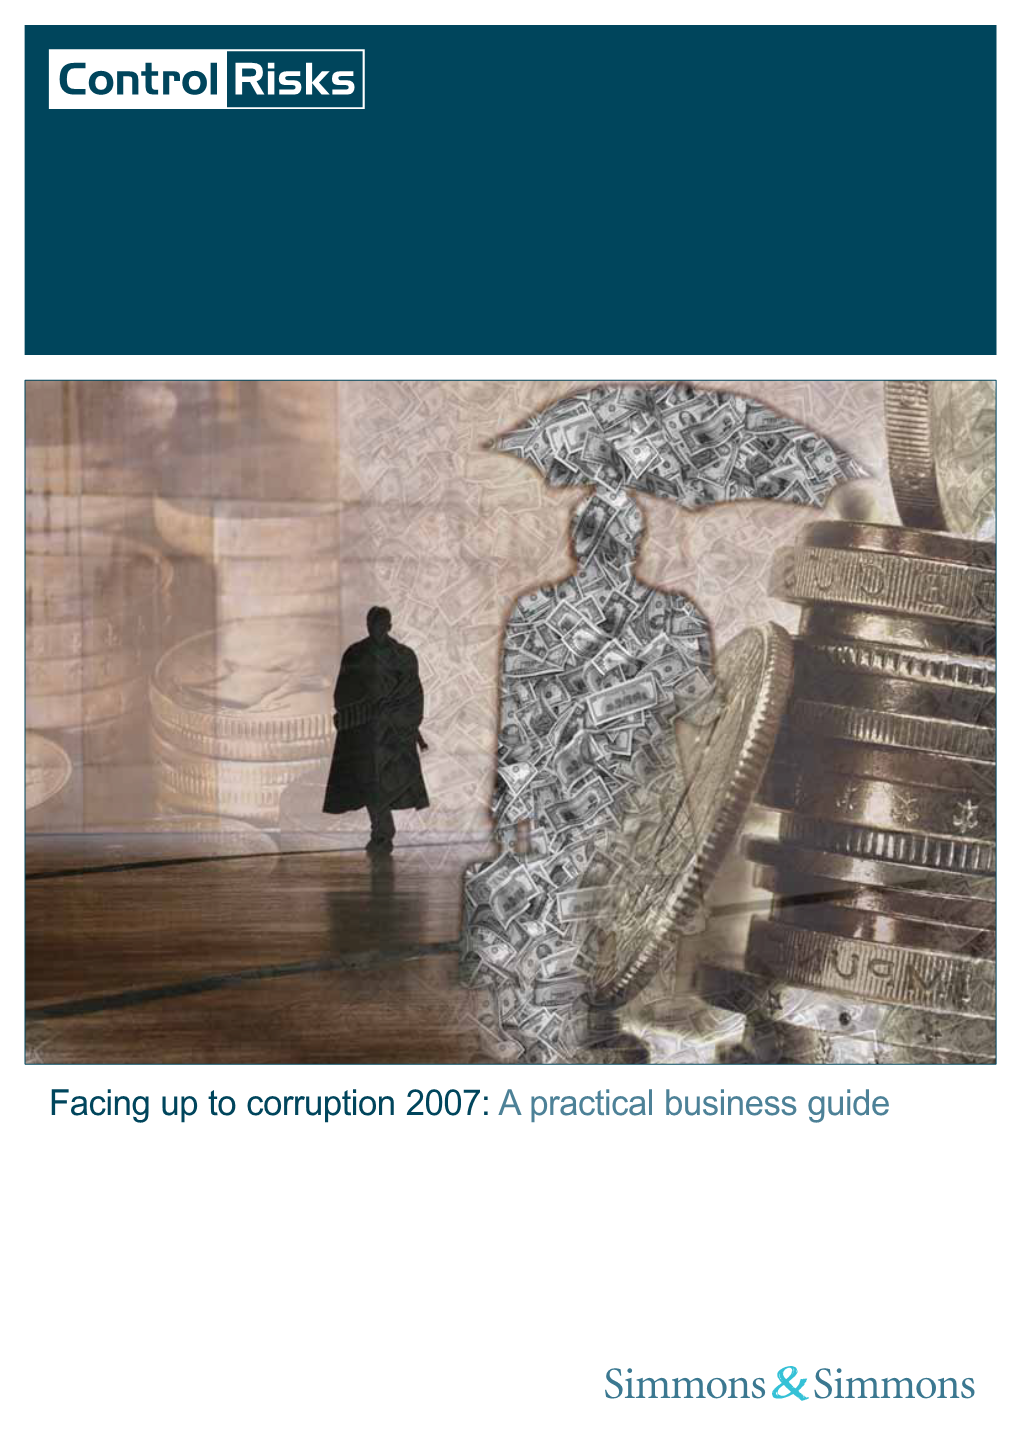 Facing up to Corruption 2007: a Practical Business Guide Facing up to Corruption a Practical Business Guide Written by John Bray, Director (Analysis), Control Risks